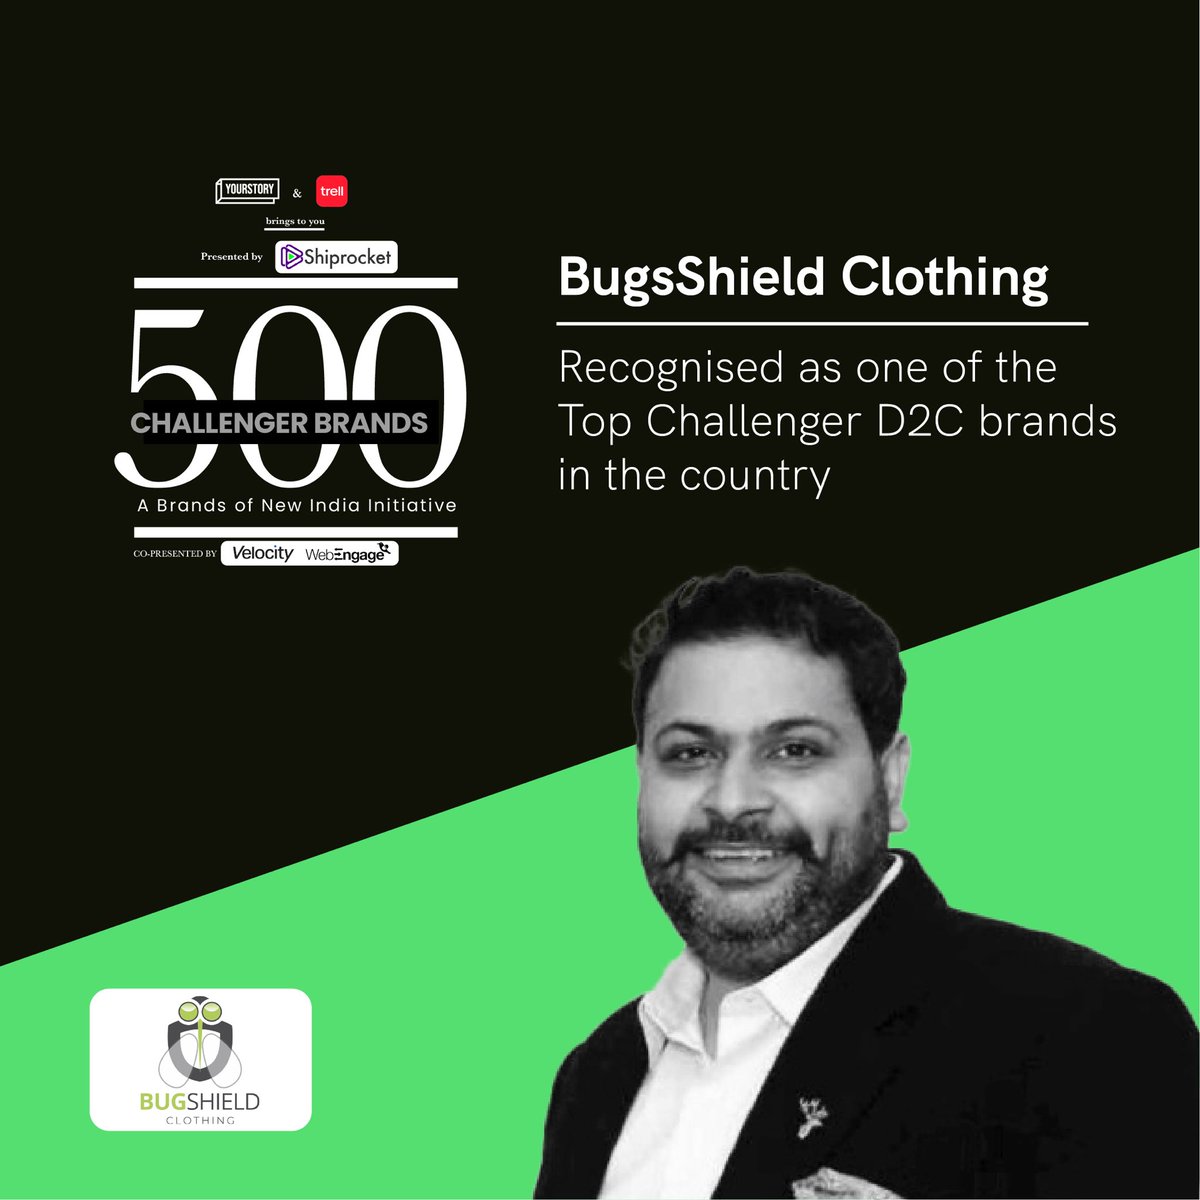 We would like to thank YourStory Media for selected BugShield Clothing for 500 Challenger Brands - D2C Hall of Fame
 
#Top500 in #India #500chanlengebrands 
 
#BrandsOfNewIndia #entrepreneur #d2cbrands #top500 #yourstorymedia #entrepreneurs #brandsofindia #startupindia #startup